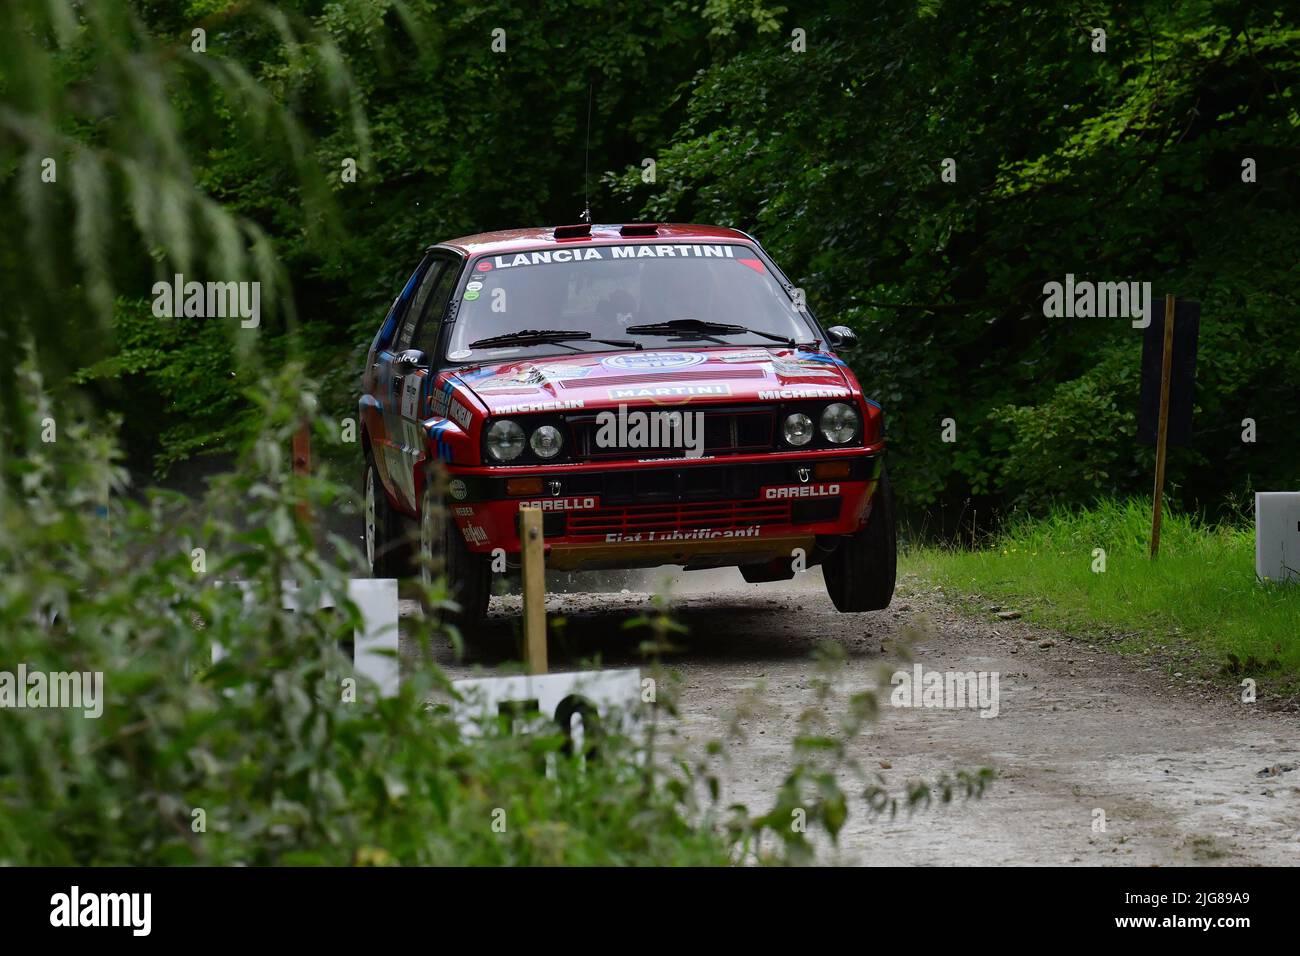 Airbourne, Frank Unger, Thorsten Scheffner, Lancia Delta HF Integrale 16V, Dawn of Modern Rallying, Forest Rally Stage, Goodwood Festival of Speed, Th Stock Photo